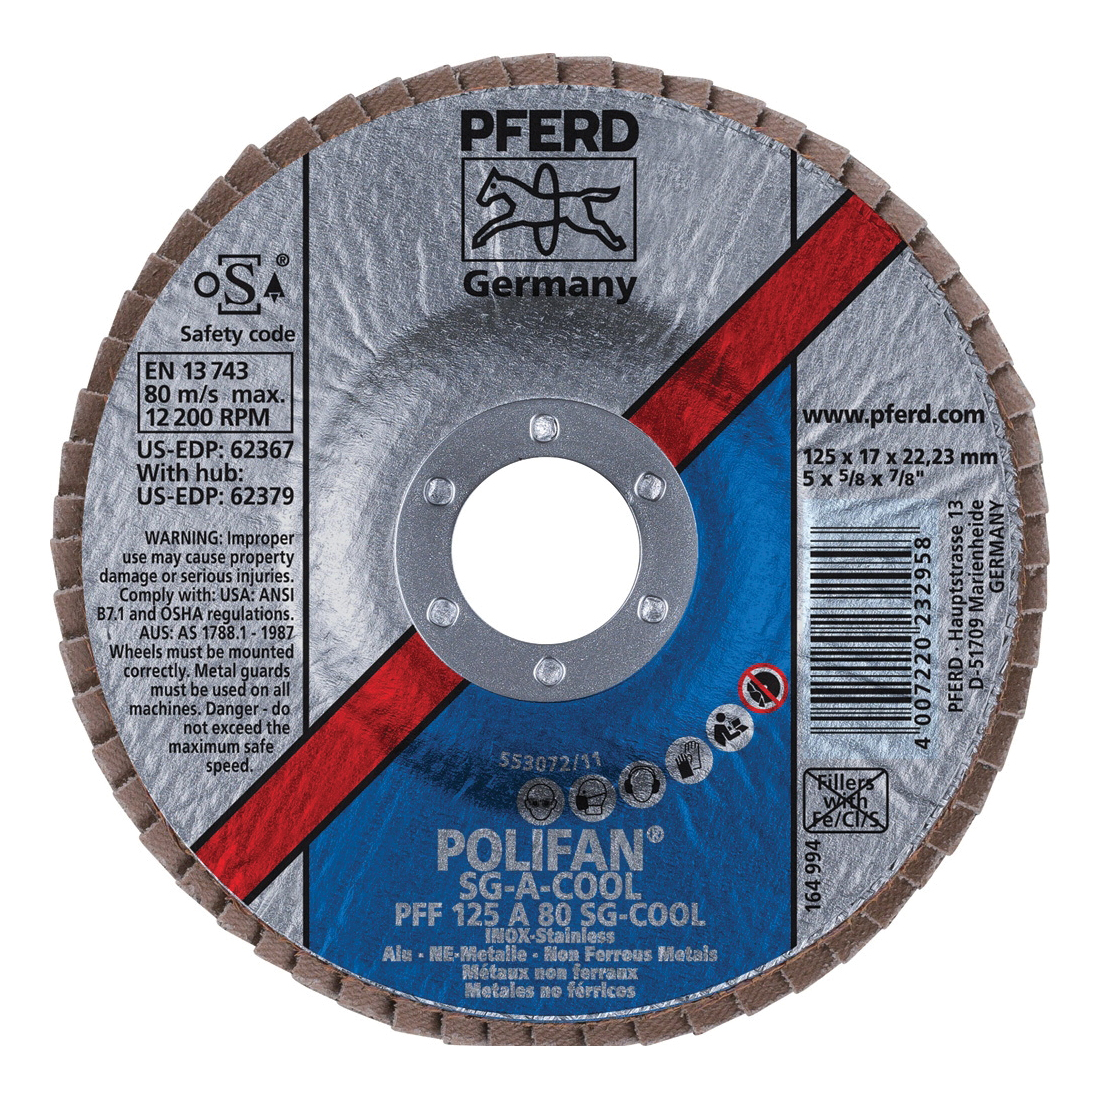 PFERD Polifan® 62367 Performance Line SG A-COOL Unthreaded Coated Abrasive Flap Disc, 5 in Dia, 7/8 in Center Hole, 80 Grit, Aluminum Oxide Abrasive, Type 27 Flat Disc